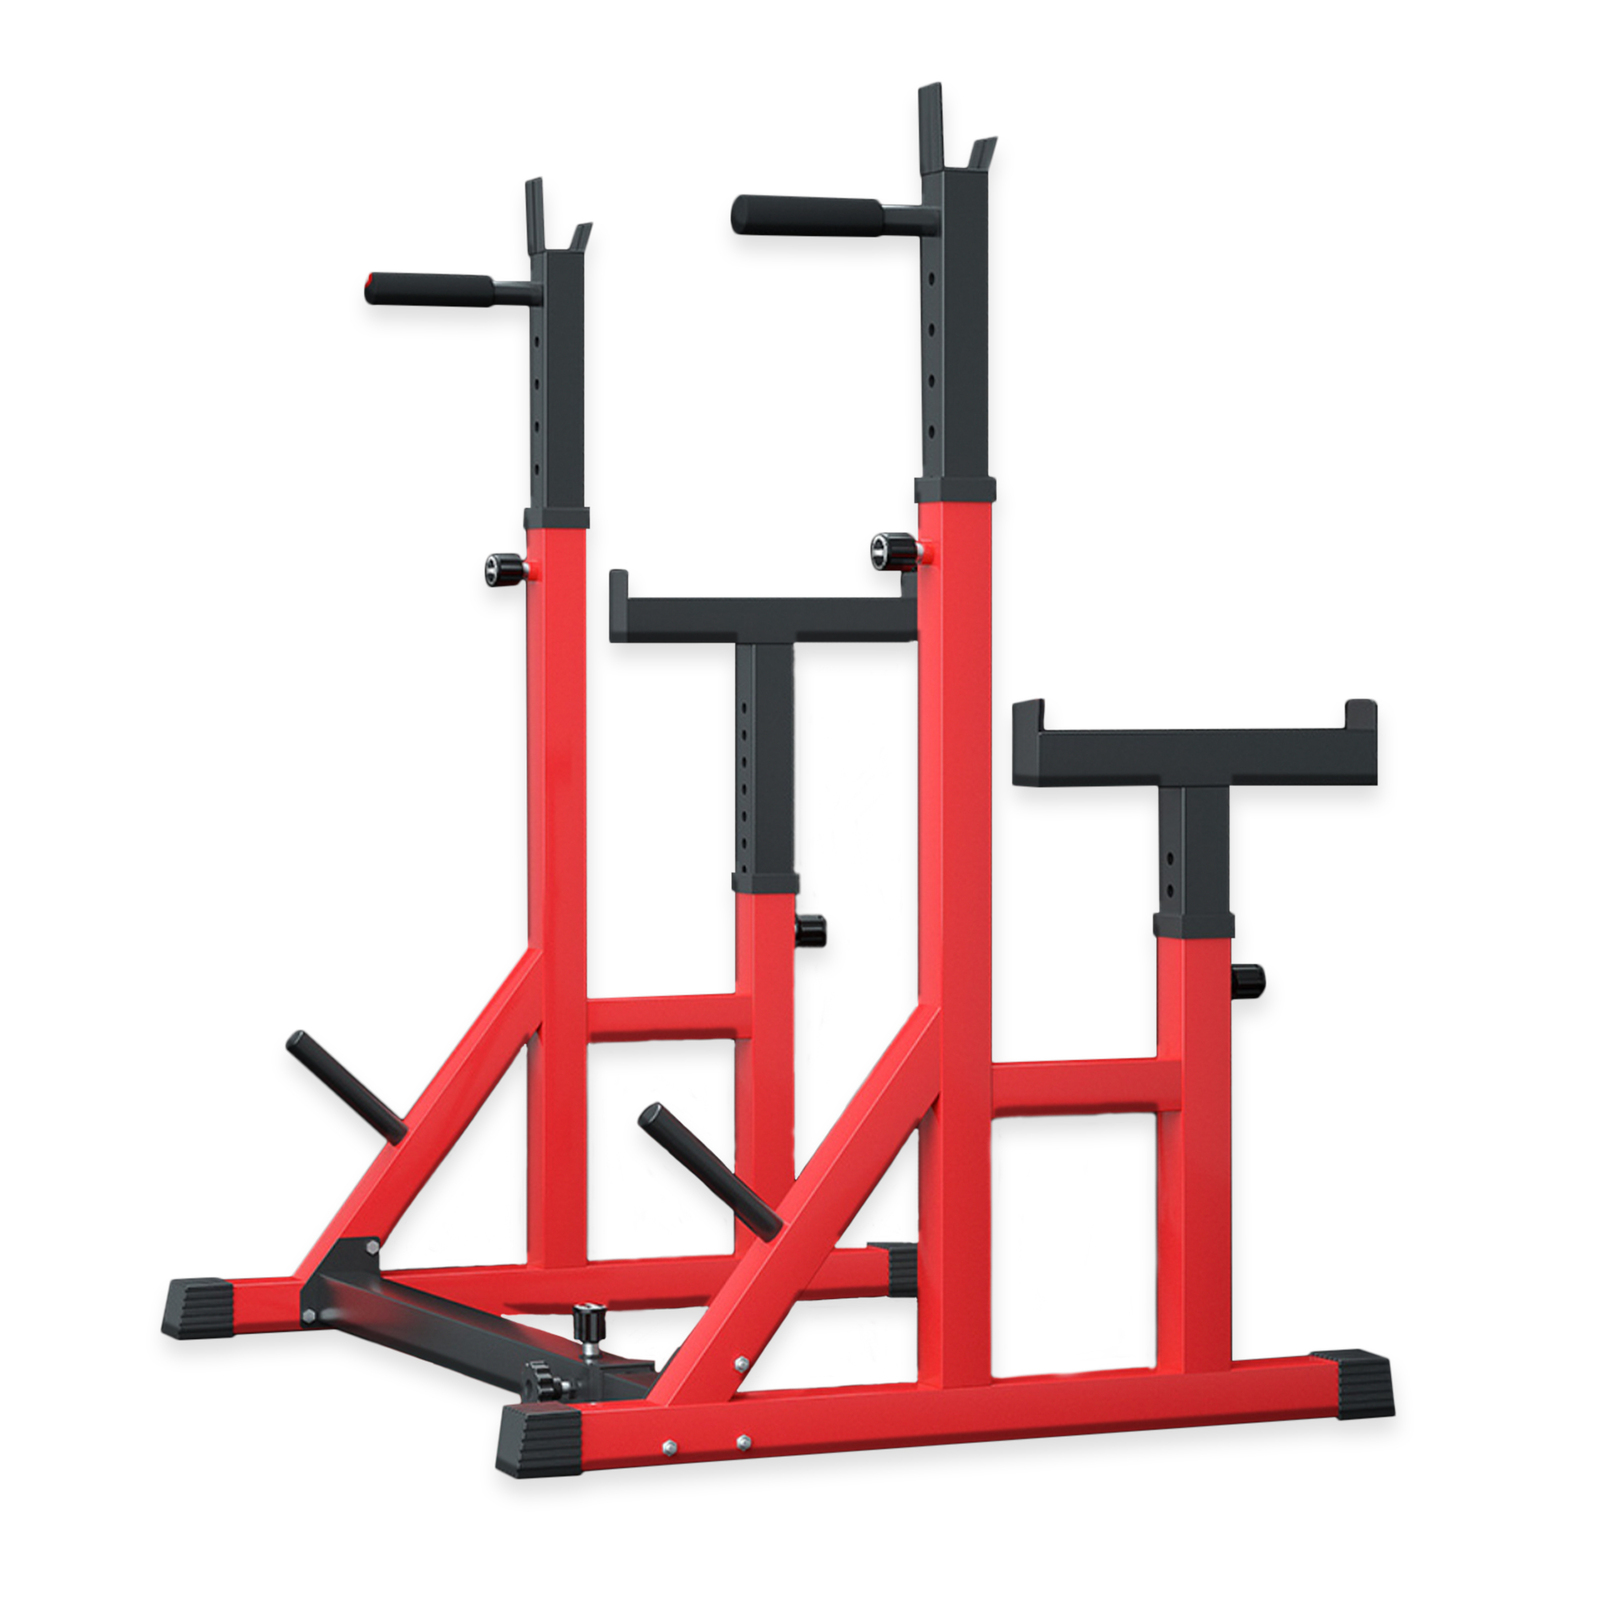 Adjustable Squat Rack Fitness Exercise Weight Lifting Home Gym Barbell Stand